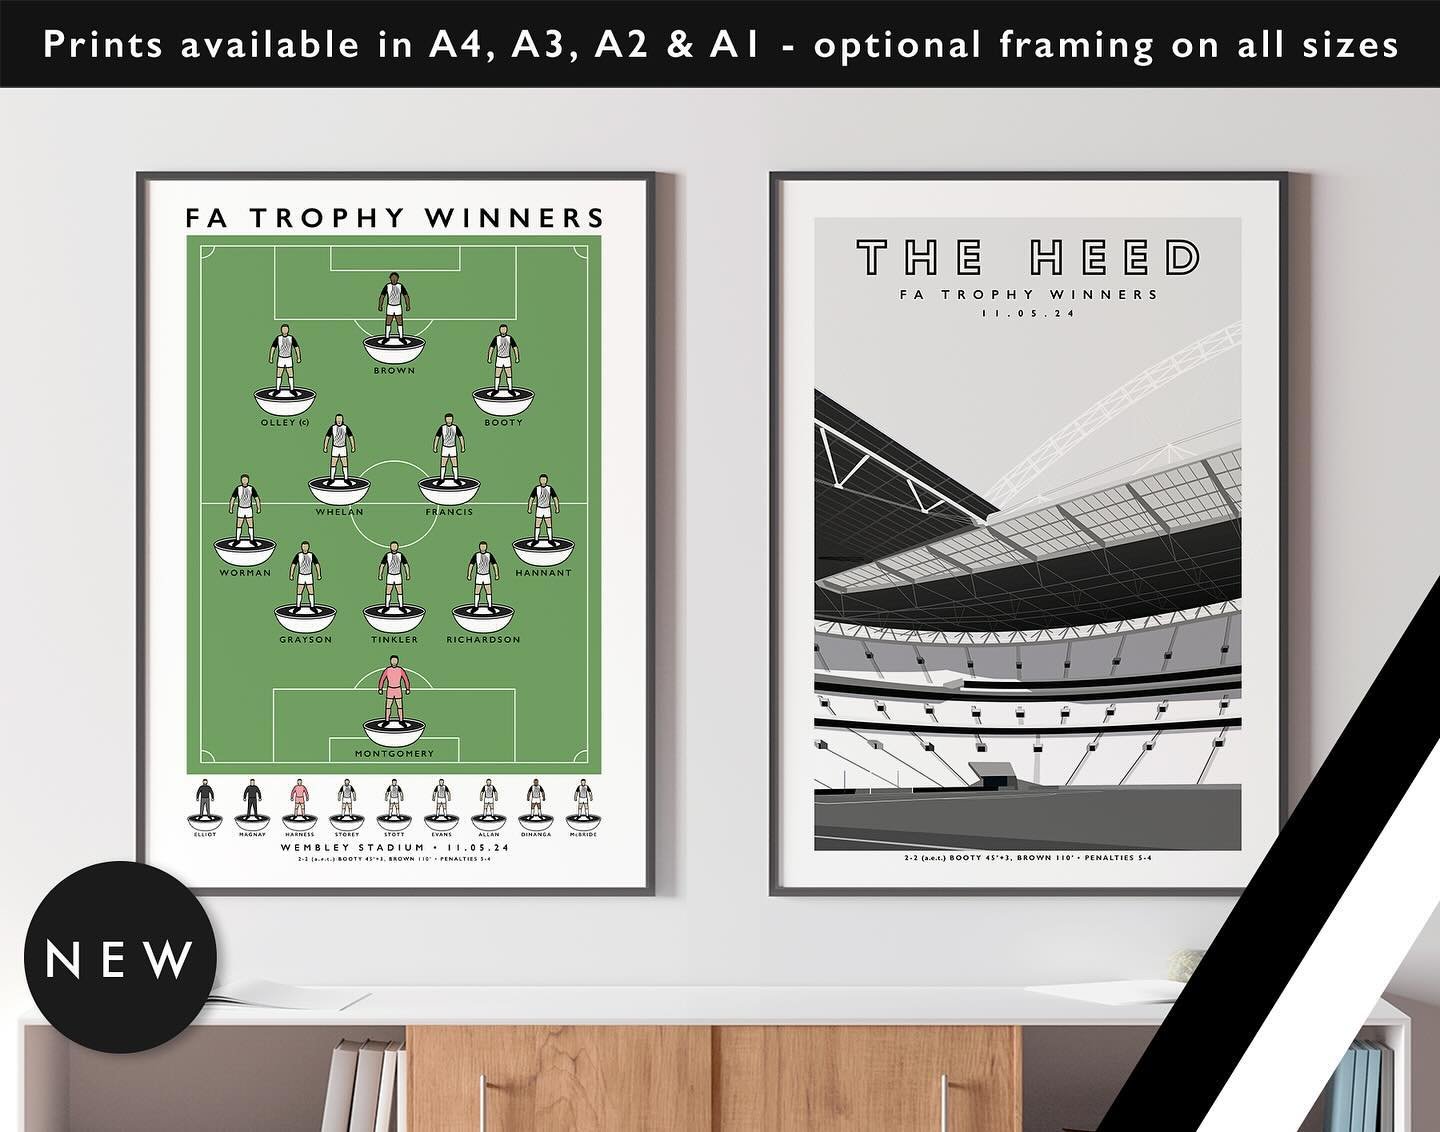 NEW: Gateshead FC FA Trophy Winners &amp; The Heed Wembley

Prints available in A4, A3, A2 &amp; A1 with optional framing 

Get 10% off until midnight with the discount code
THE-HEED 

Shop now: matthewjiwood.com/subbuteo-teams&hellip;

#GatesheadFC 